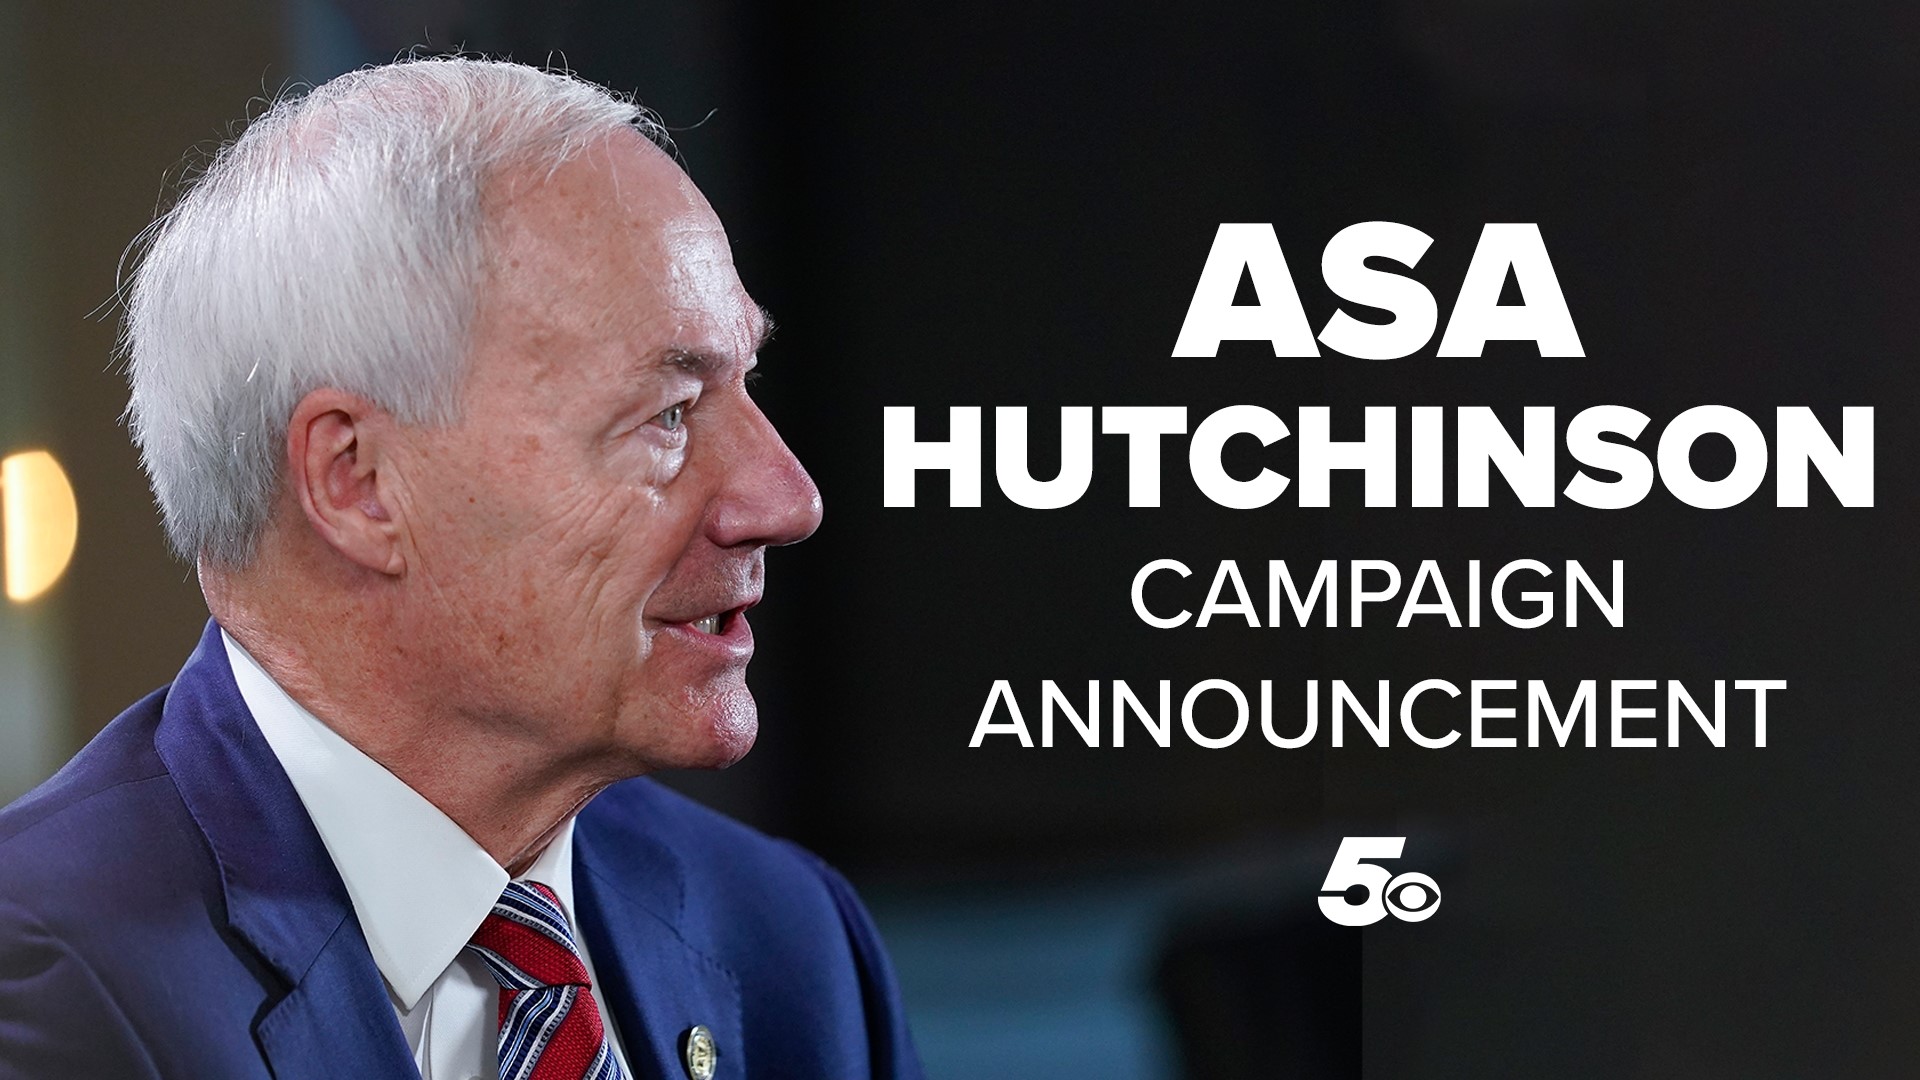 Asa Hutchinson is formally announcing his bid for the president of the United States and Arkansans from across the country came to share their opinions.